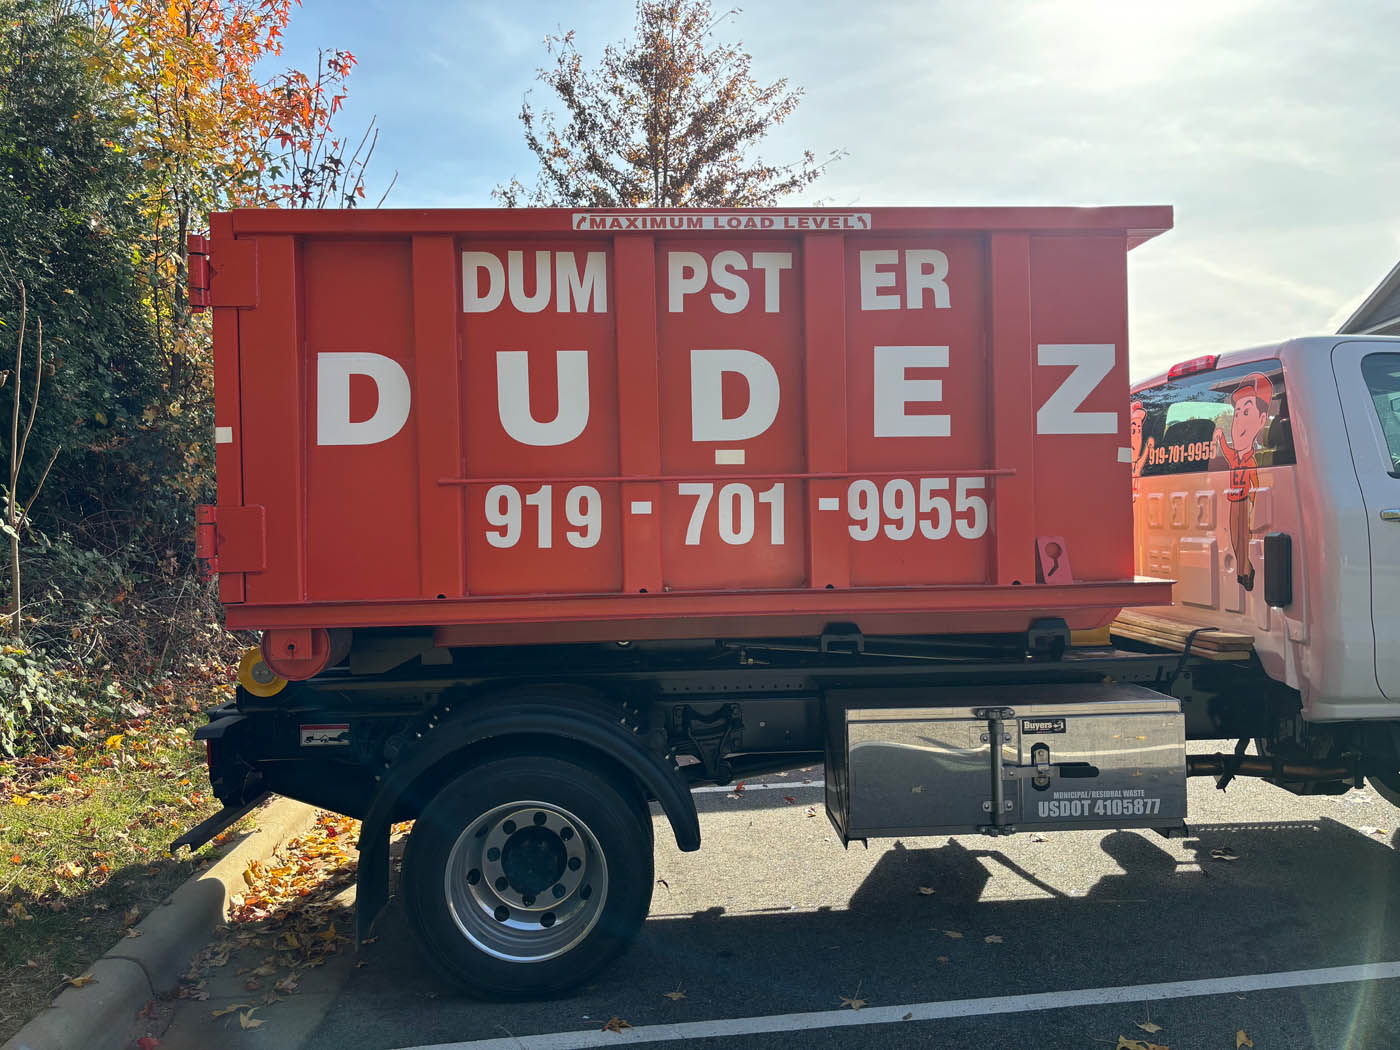 A truck pulling a Dumpster Dudez dumpster - learn a few dumpster rental tips to make your next project run smoothly!